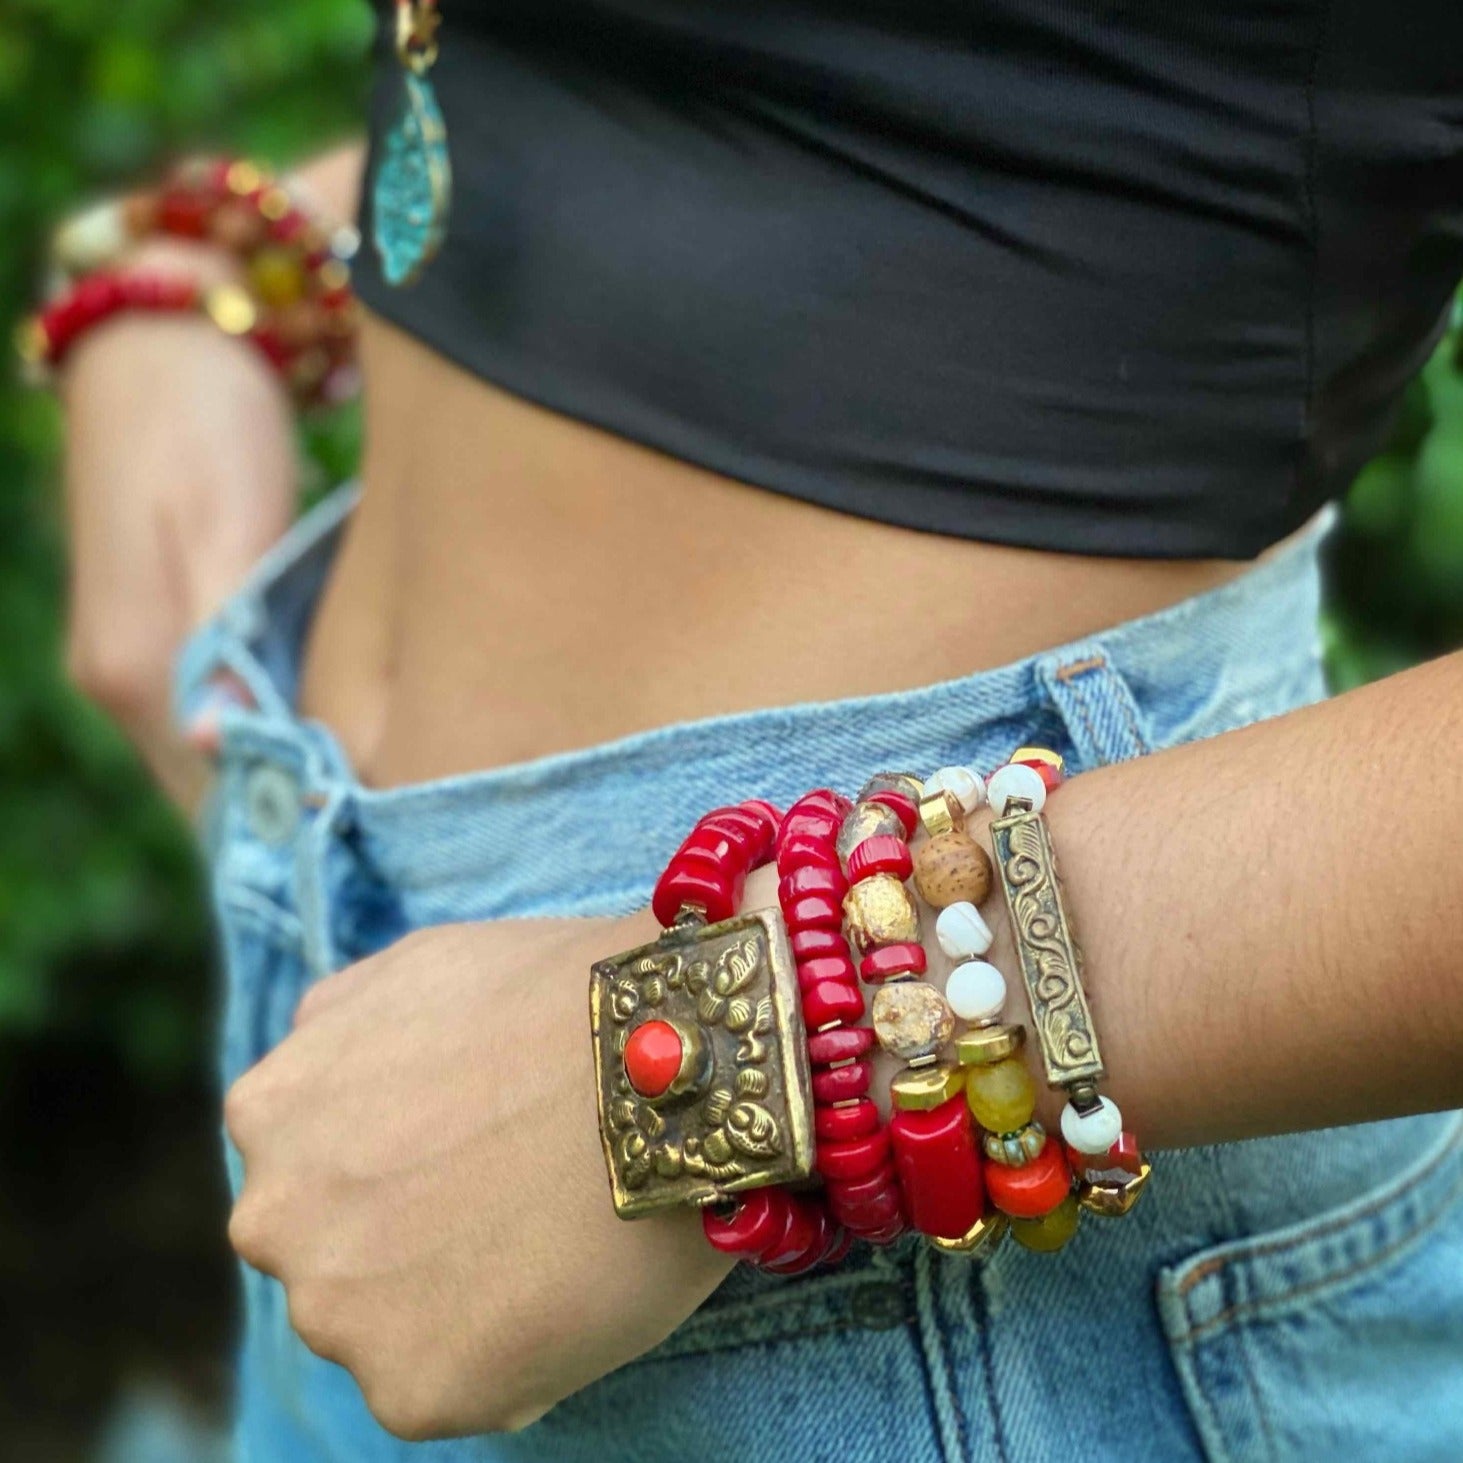 The model showcases the Vintage Style Tibetan Bracelet Set, highlighting its intricate designs and vibrant colors.